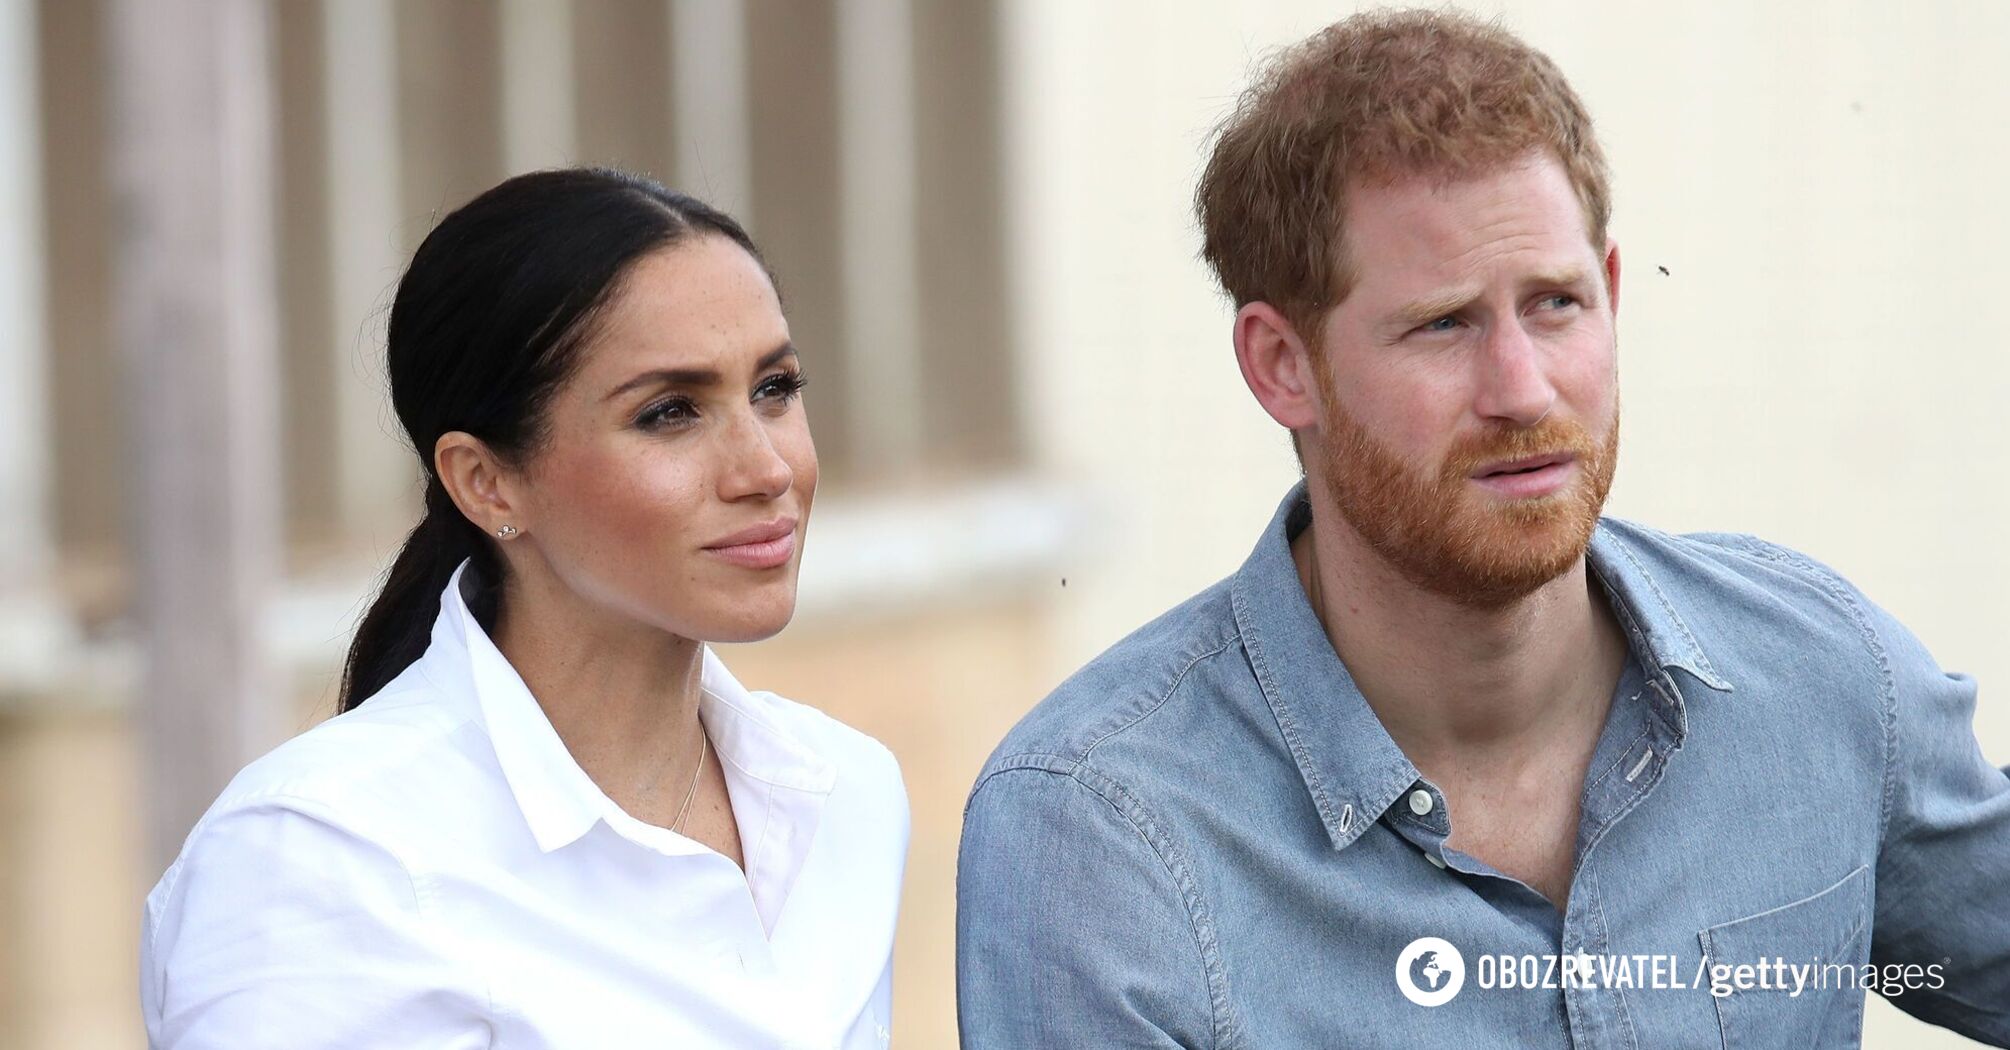 Prince Harry says he is afraid to take his wife and children to the UK as they can be attacked with knife or acid